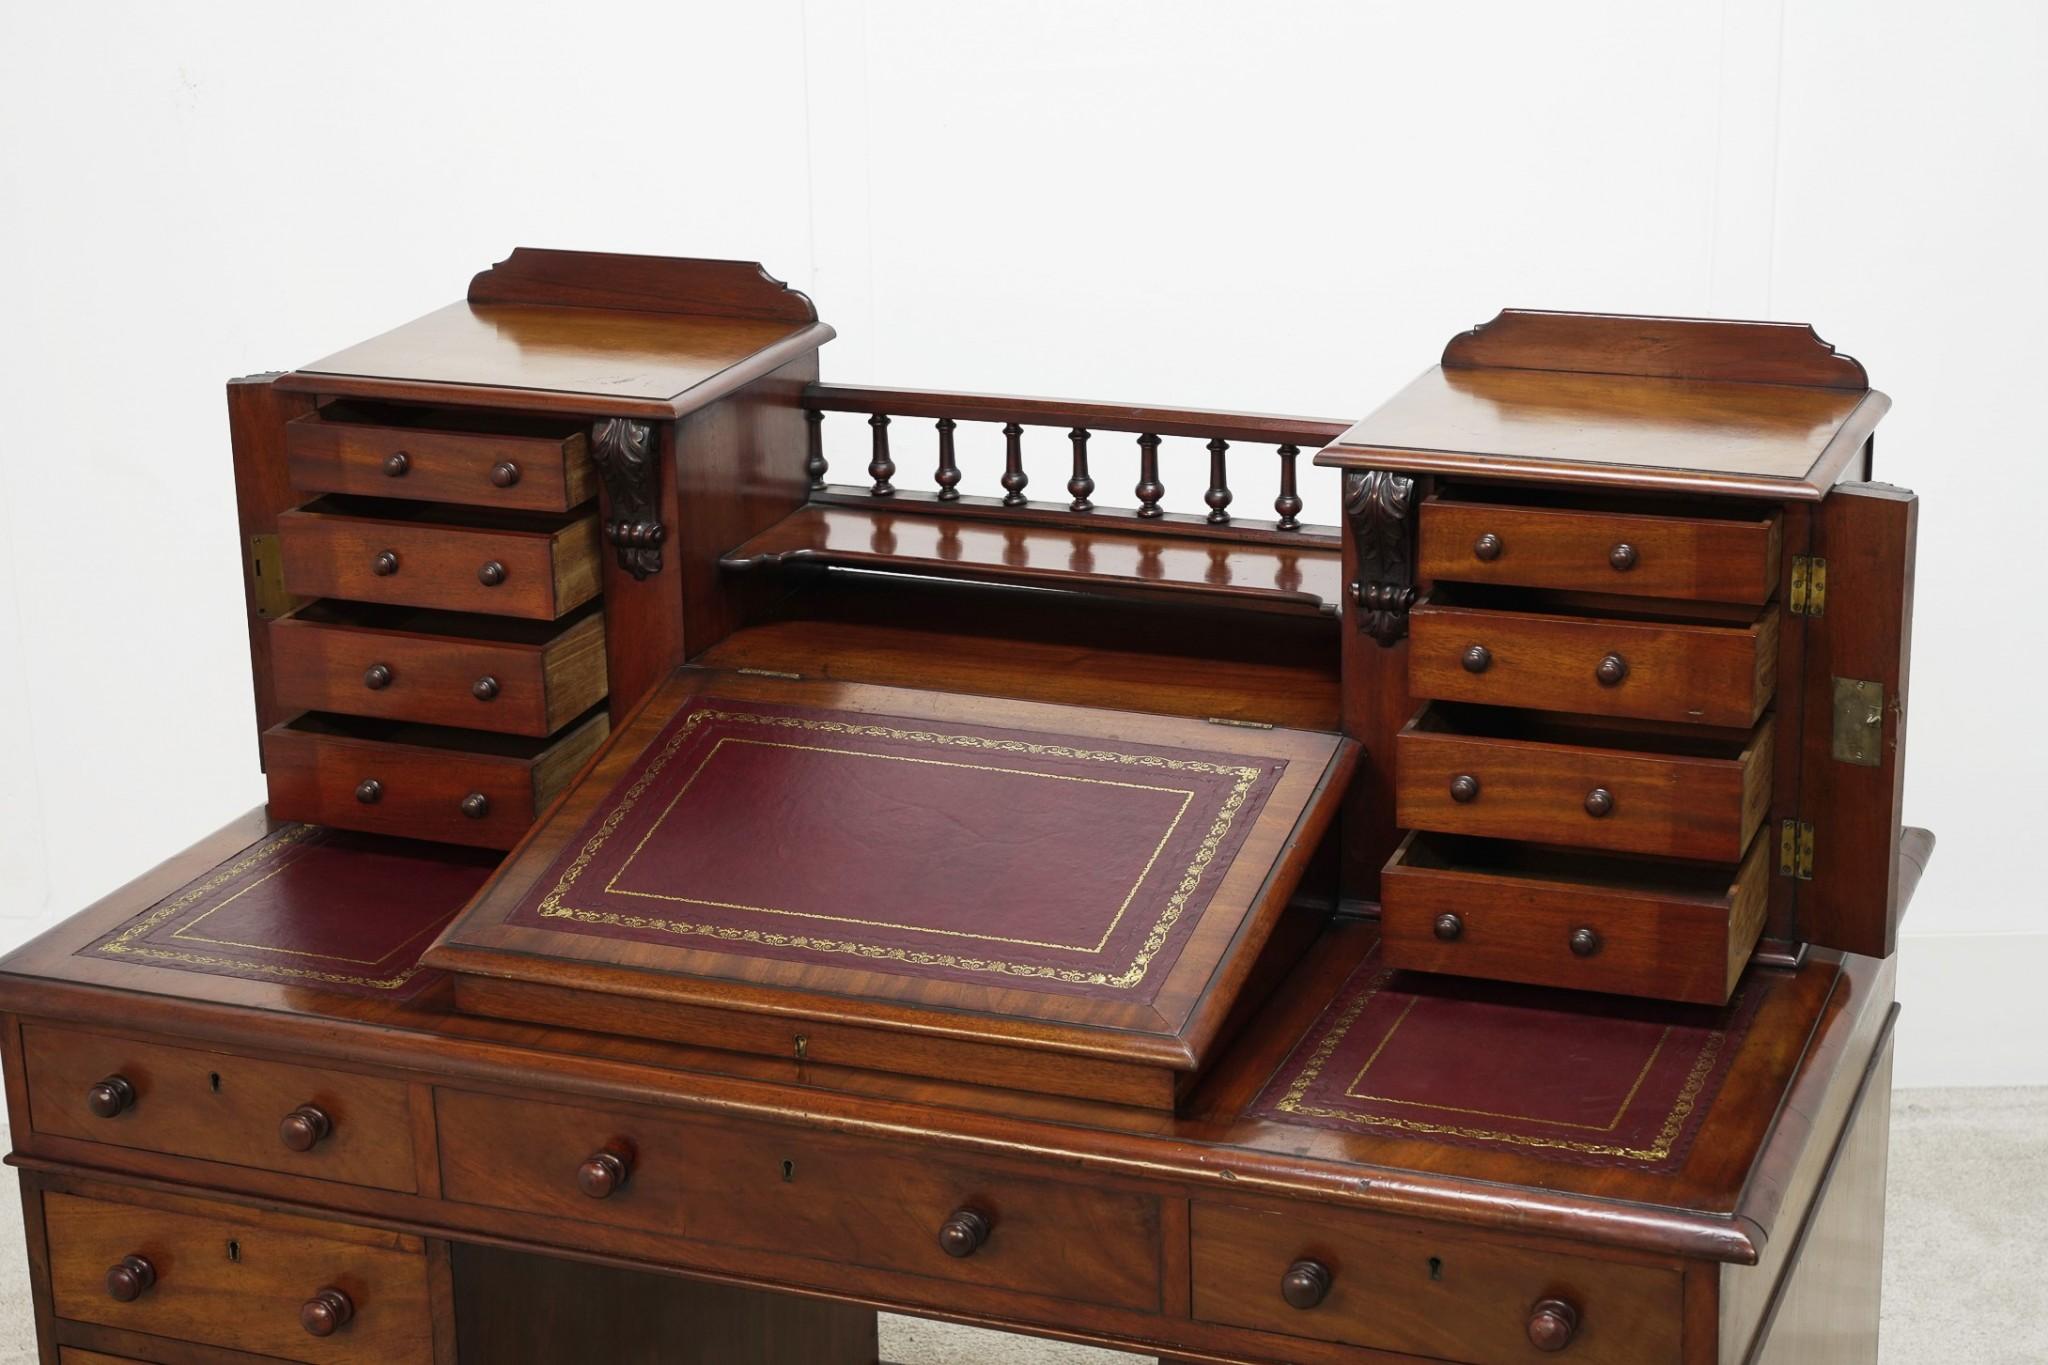 Late 19th Century Victorian Charles Dickens Desk Mahogany Writing Table 1880 For Sale